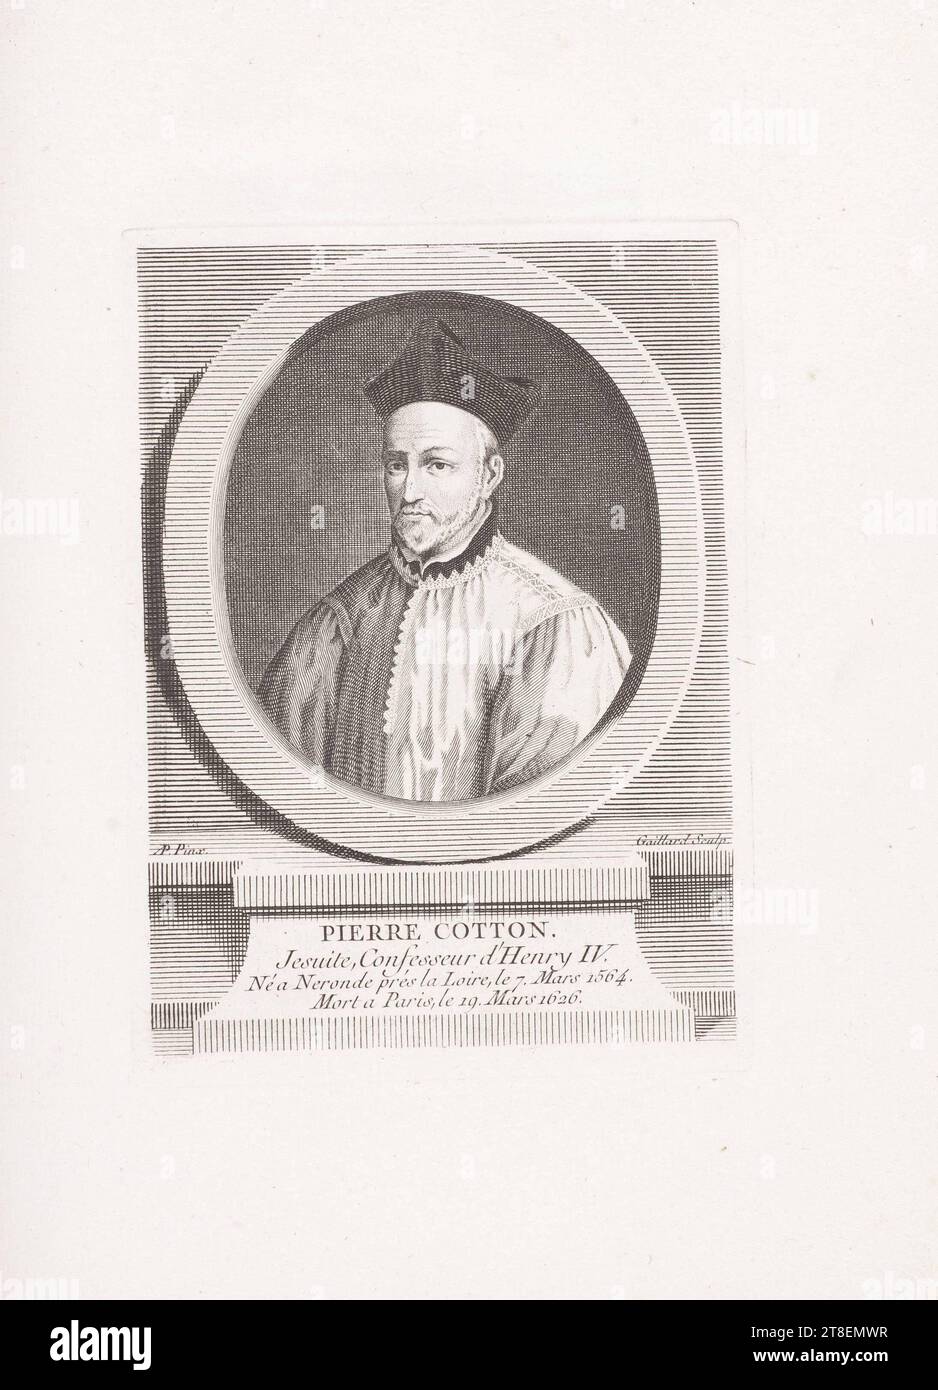 AP. Pinx. Gaillard Sculp. PIERRE COTTON. Jesuit, Confessor of Henry IV. Born in Neronde near the Loire, on the 7th. March 1564. Died in Paris, the 19. March 1626 Stock Photo